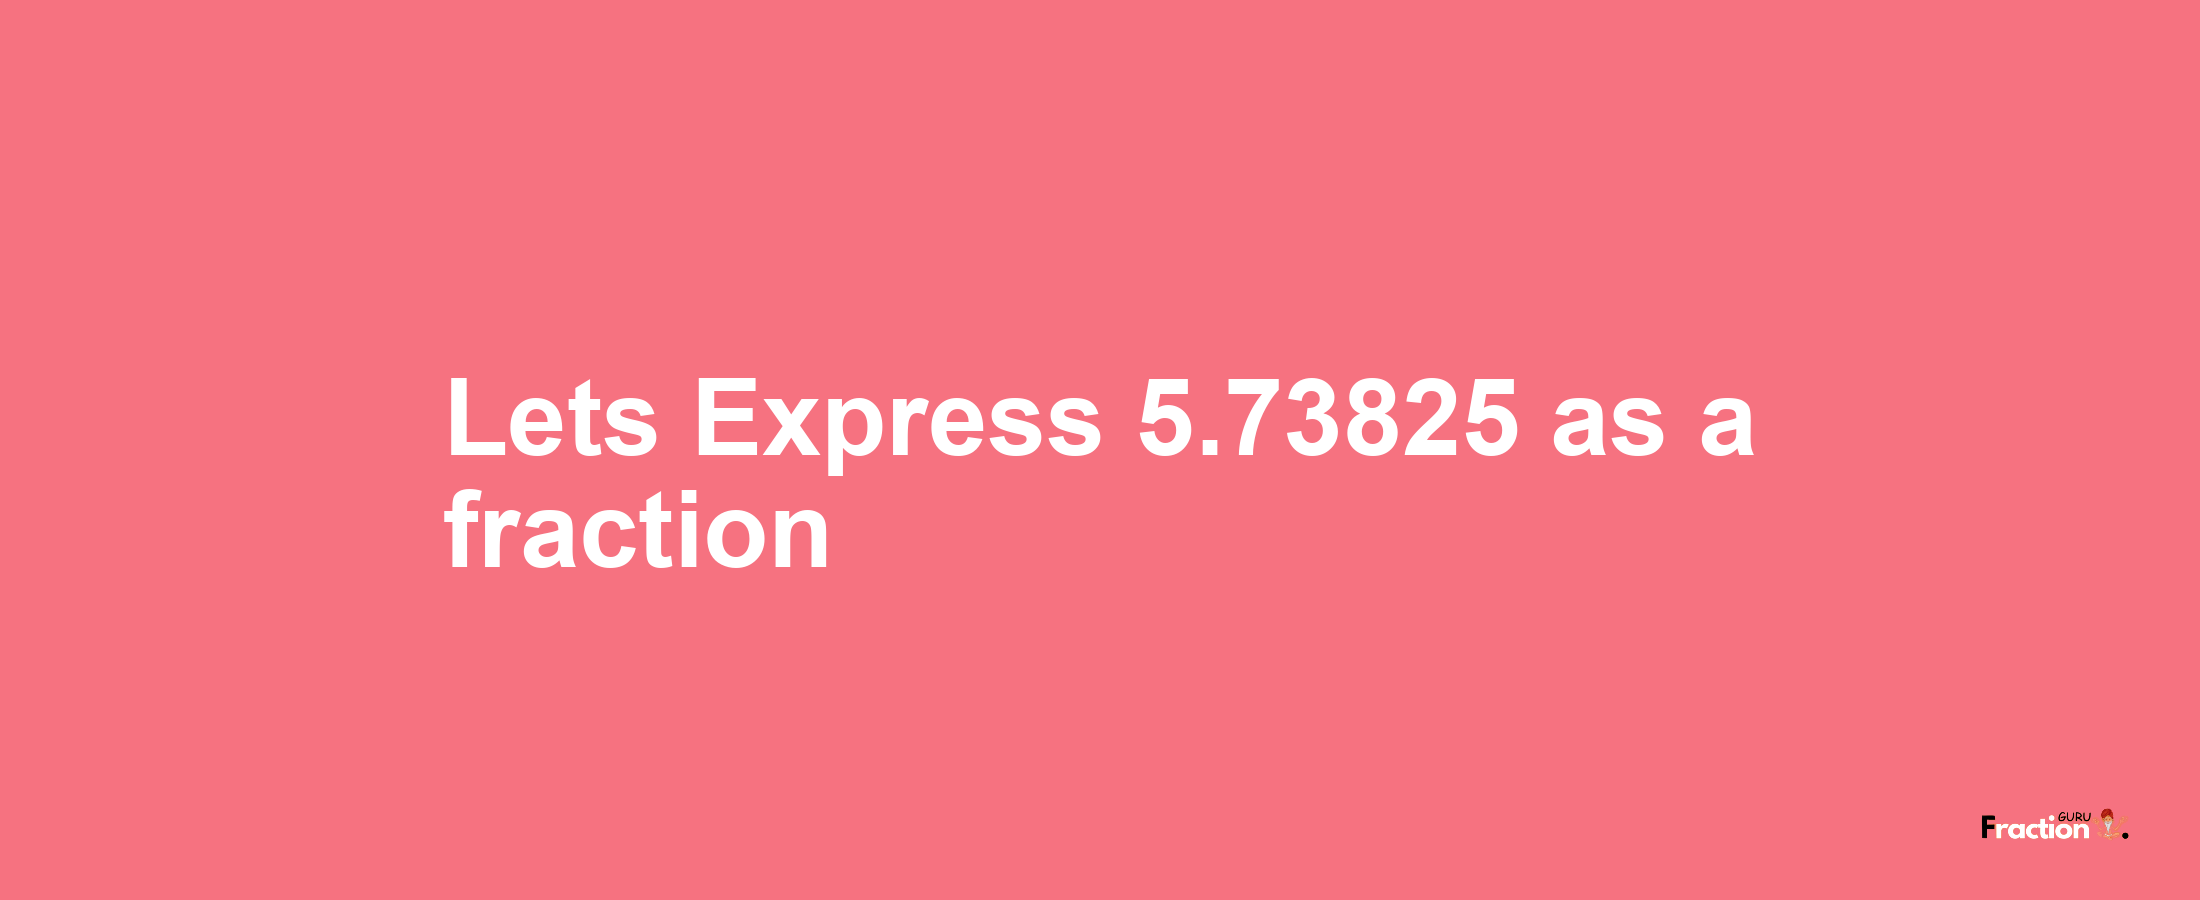 Lets Express 5.73825 as afraction